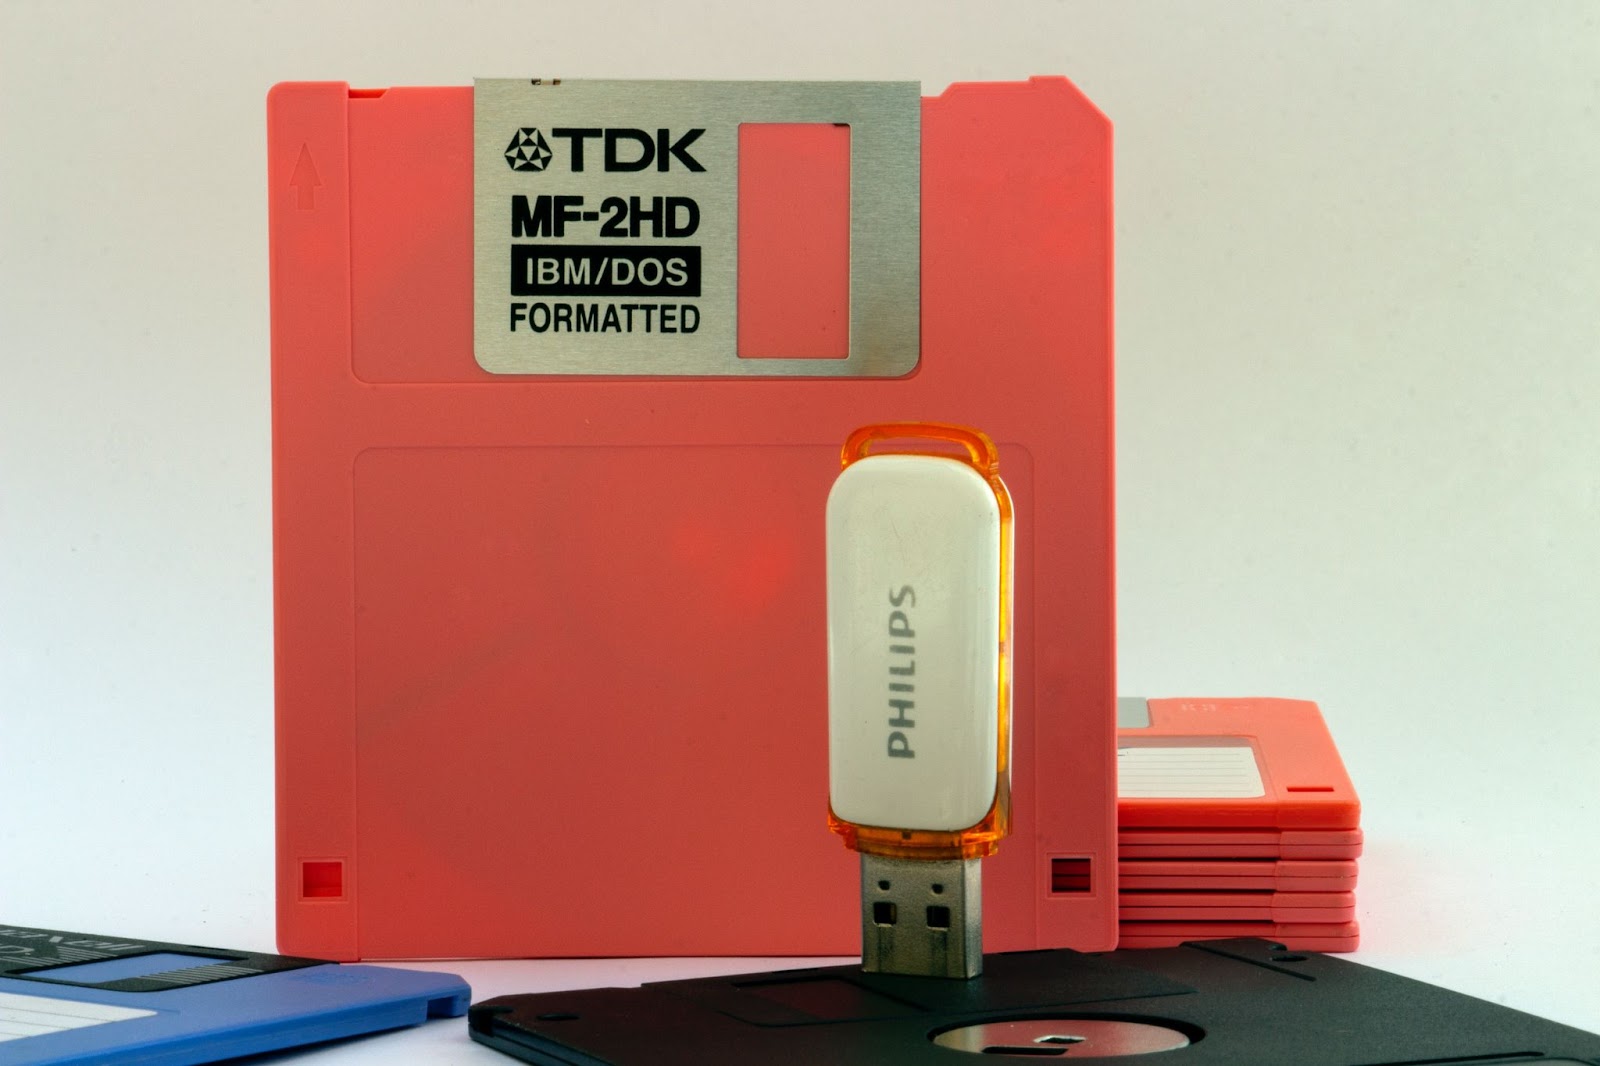 A usb and a floppy drive